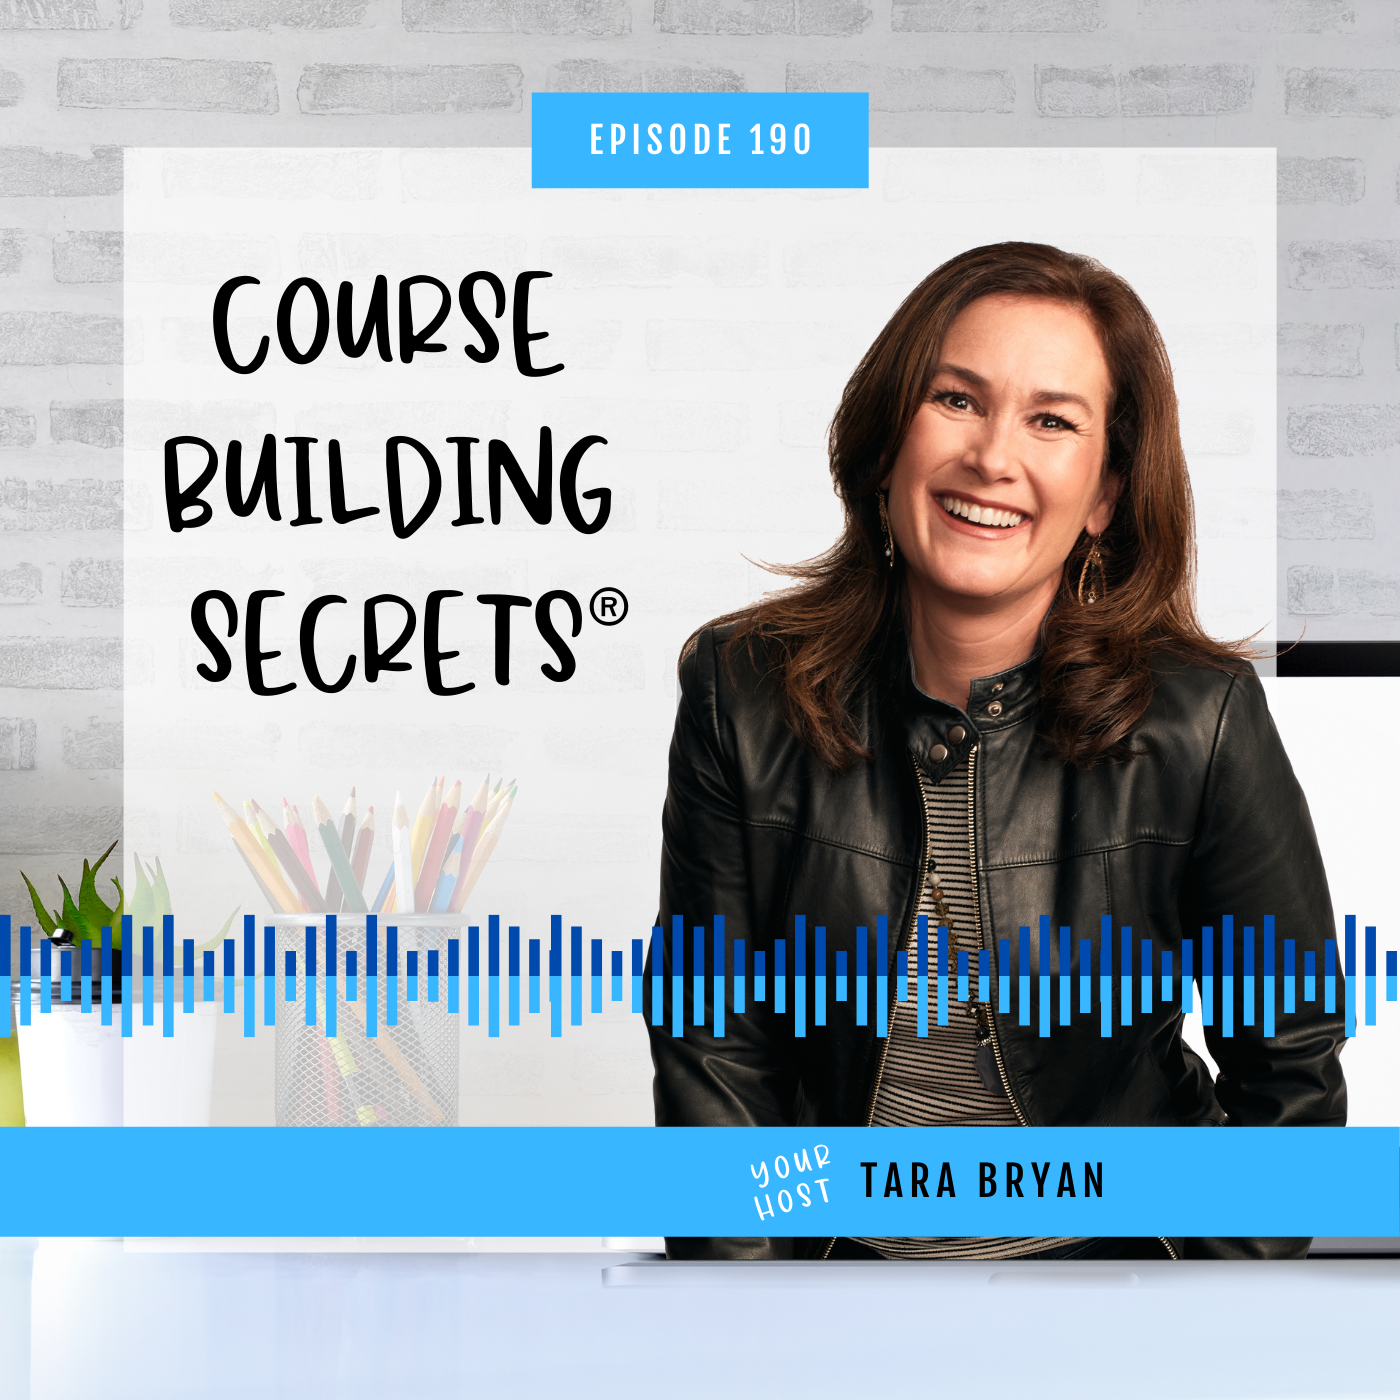 Welcome to Season 2 of the Course Building Secrets® Podcast